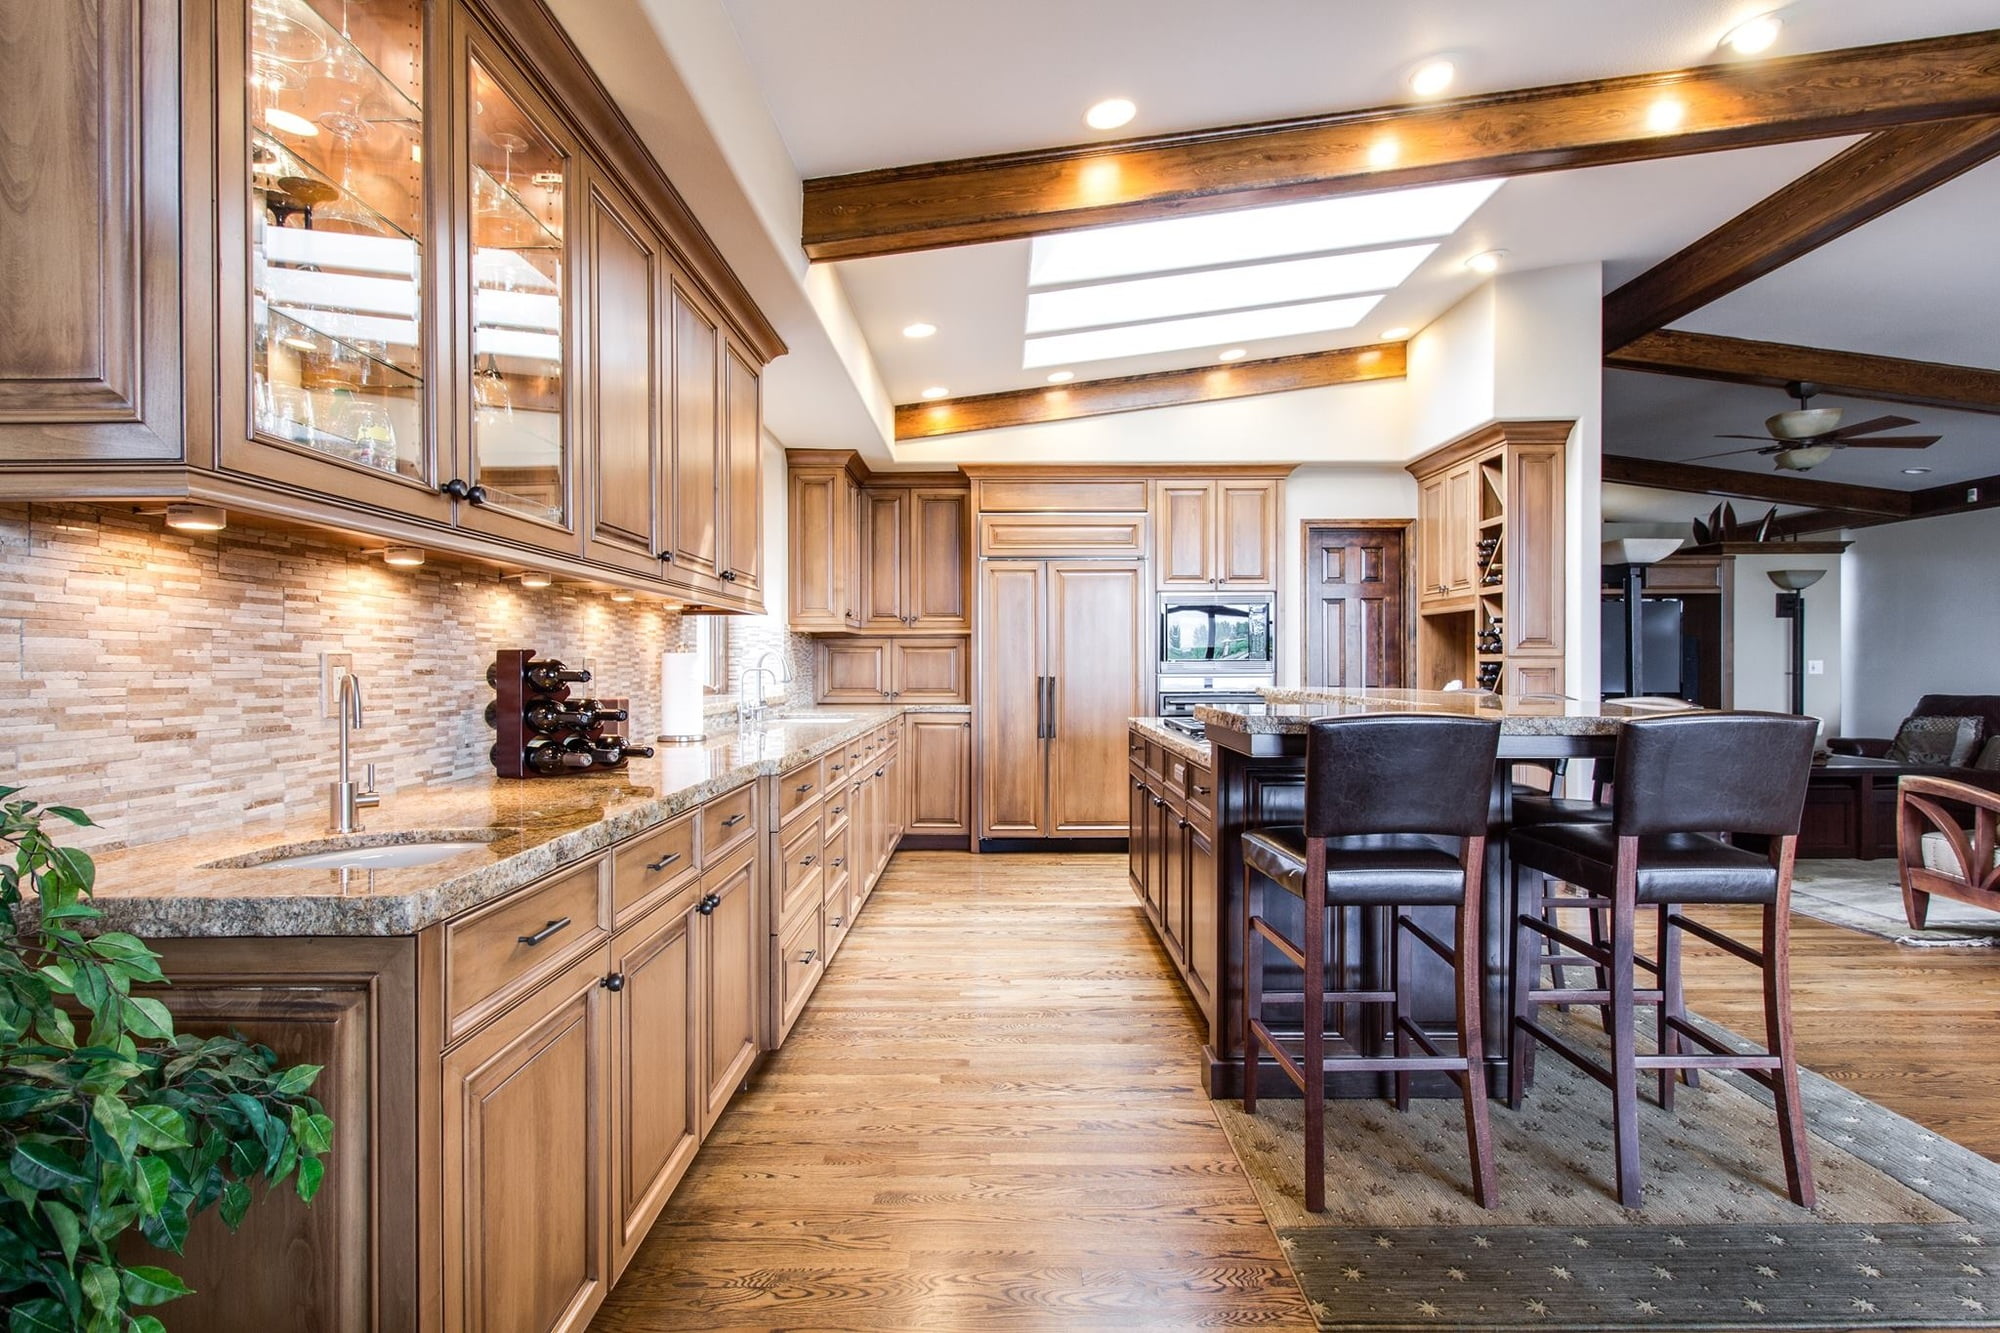 Giving your kitchen the right design requires knowing what not to do. Here are common kitchen design mistakes and how to avoid them.